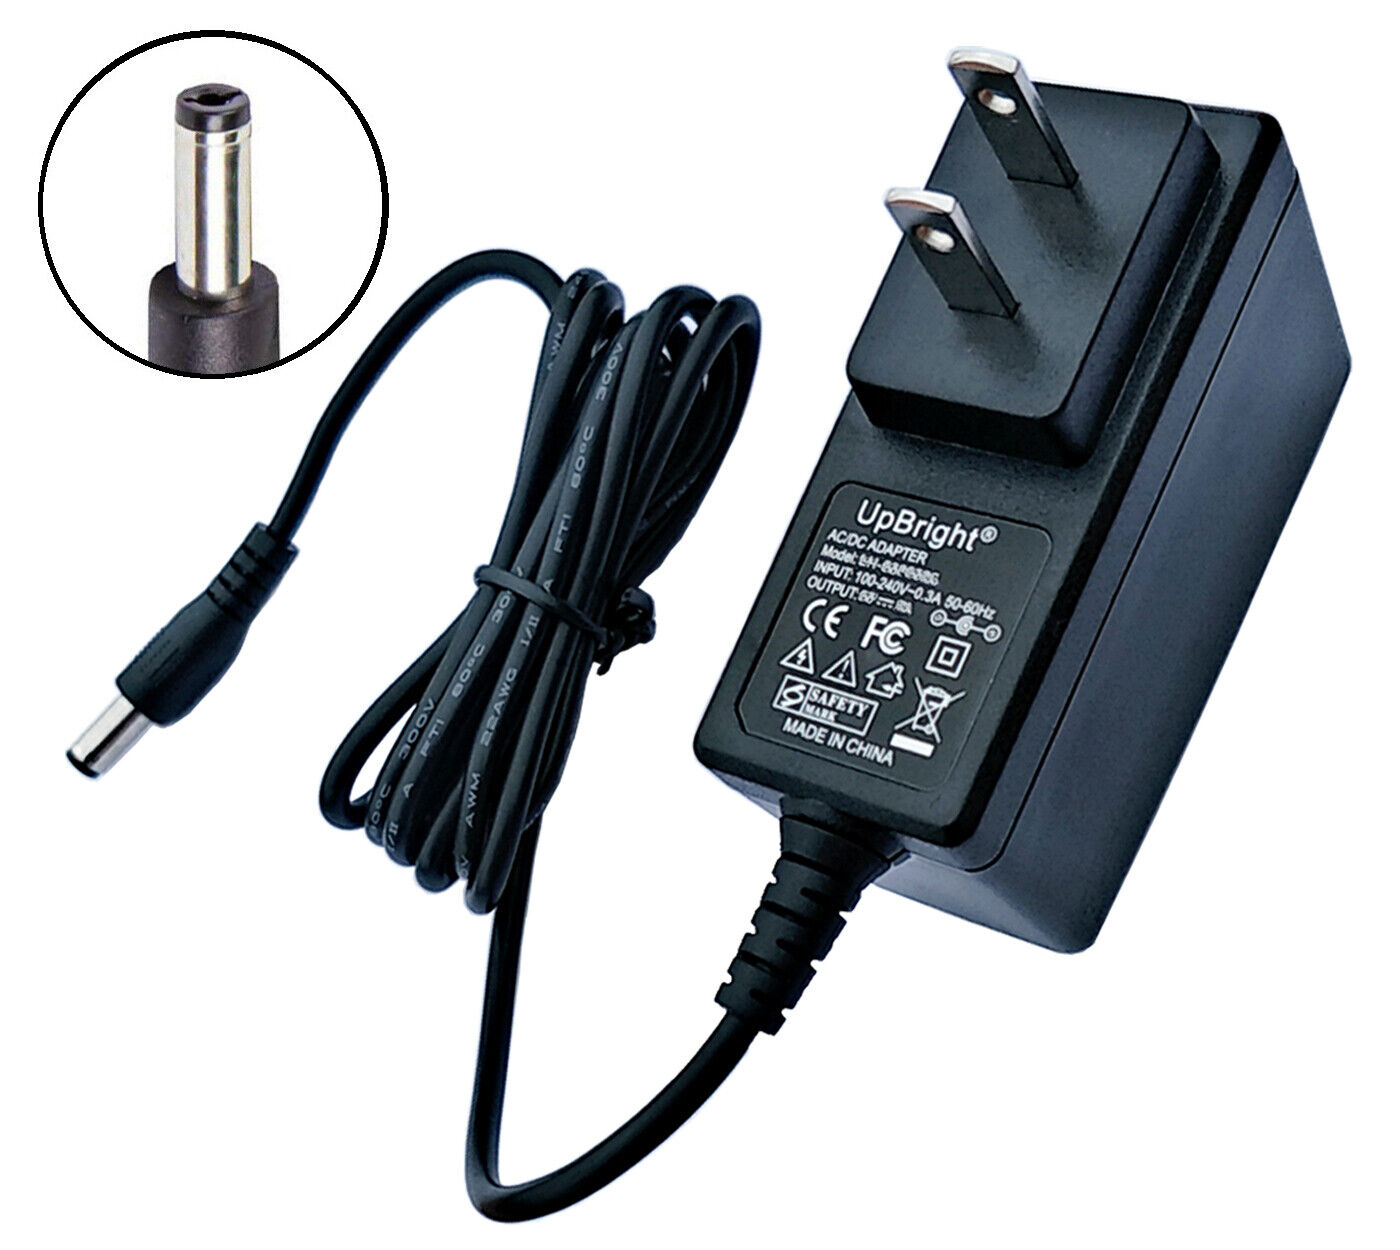 12V AC Adapter For Vintage Pioneer PL-202AZ Stereo Turntable Record Player 12VDC